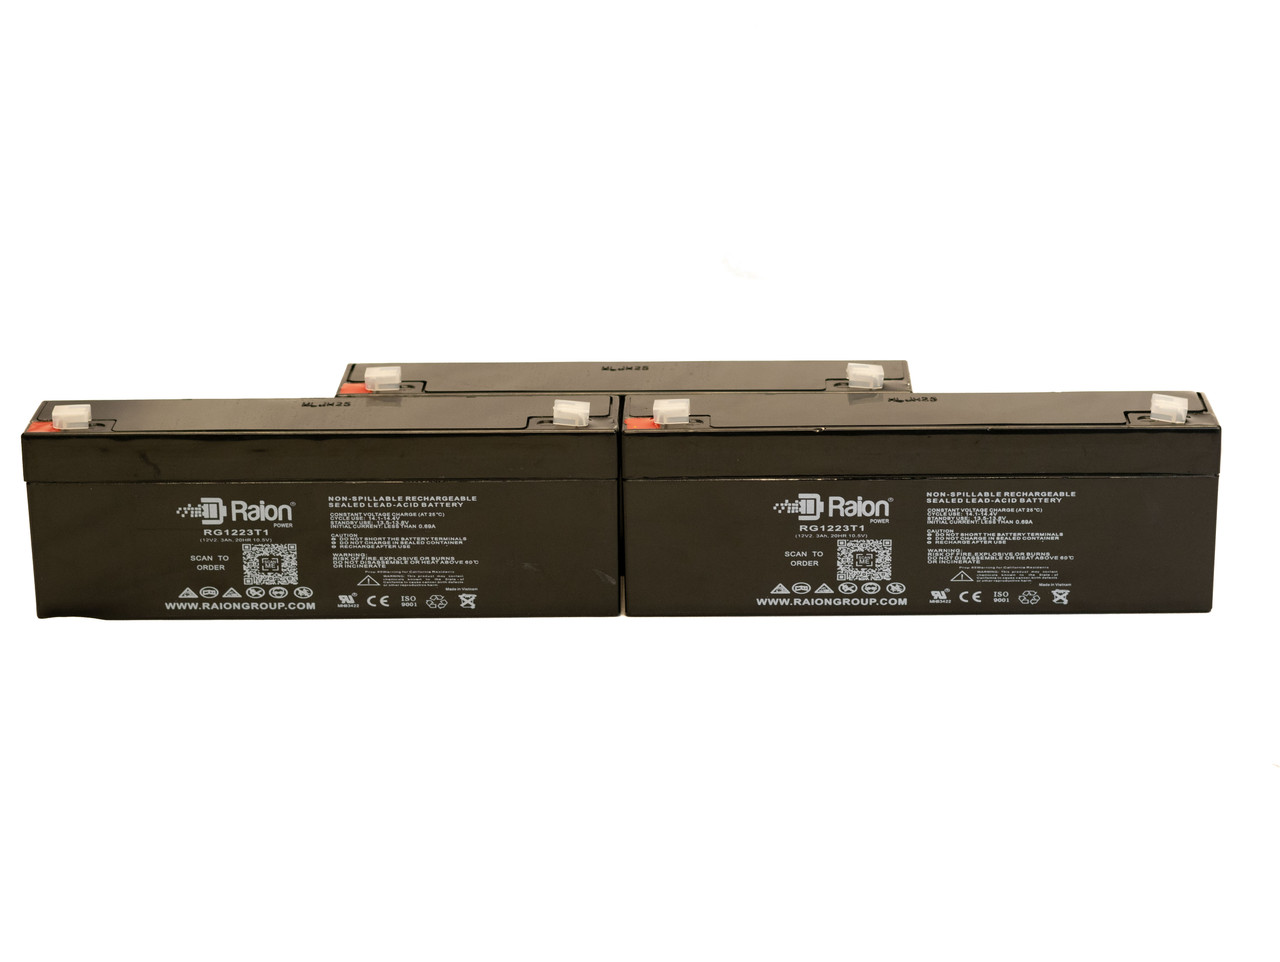 Raion Power 12V 2.3Ah RG1223T1 Replacement Medical Battery for Baxter Healthcare AS5B - 3 Pack